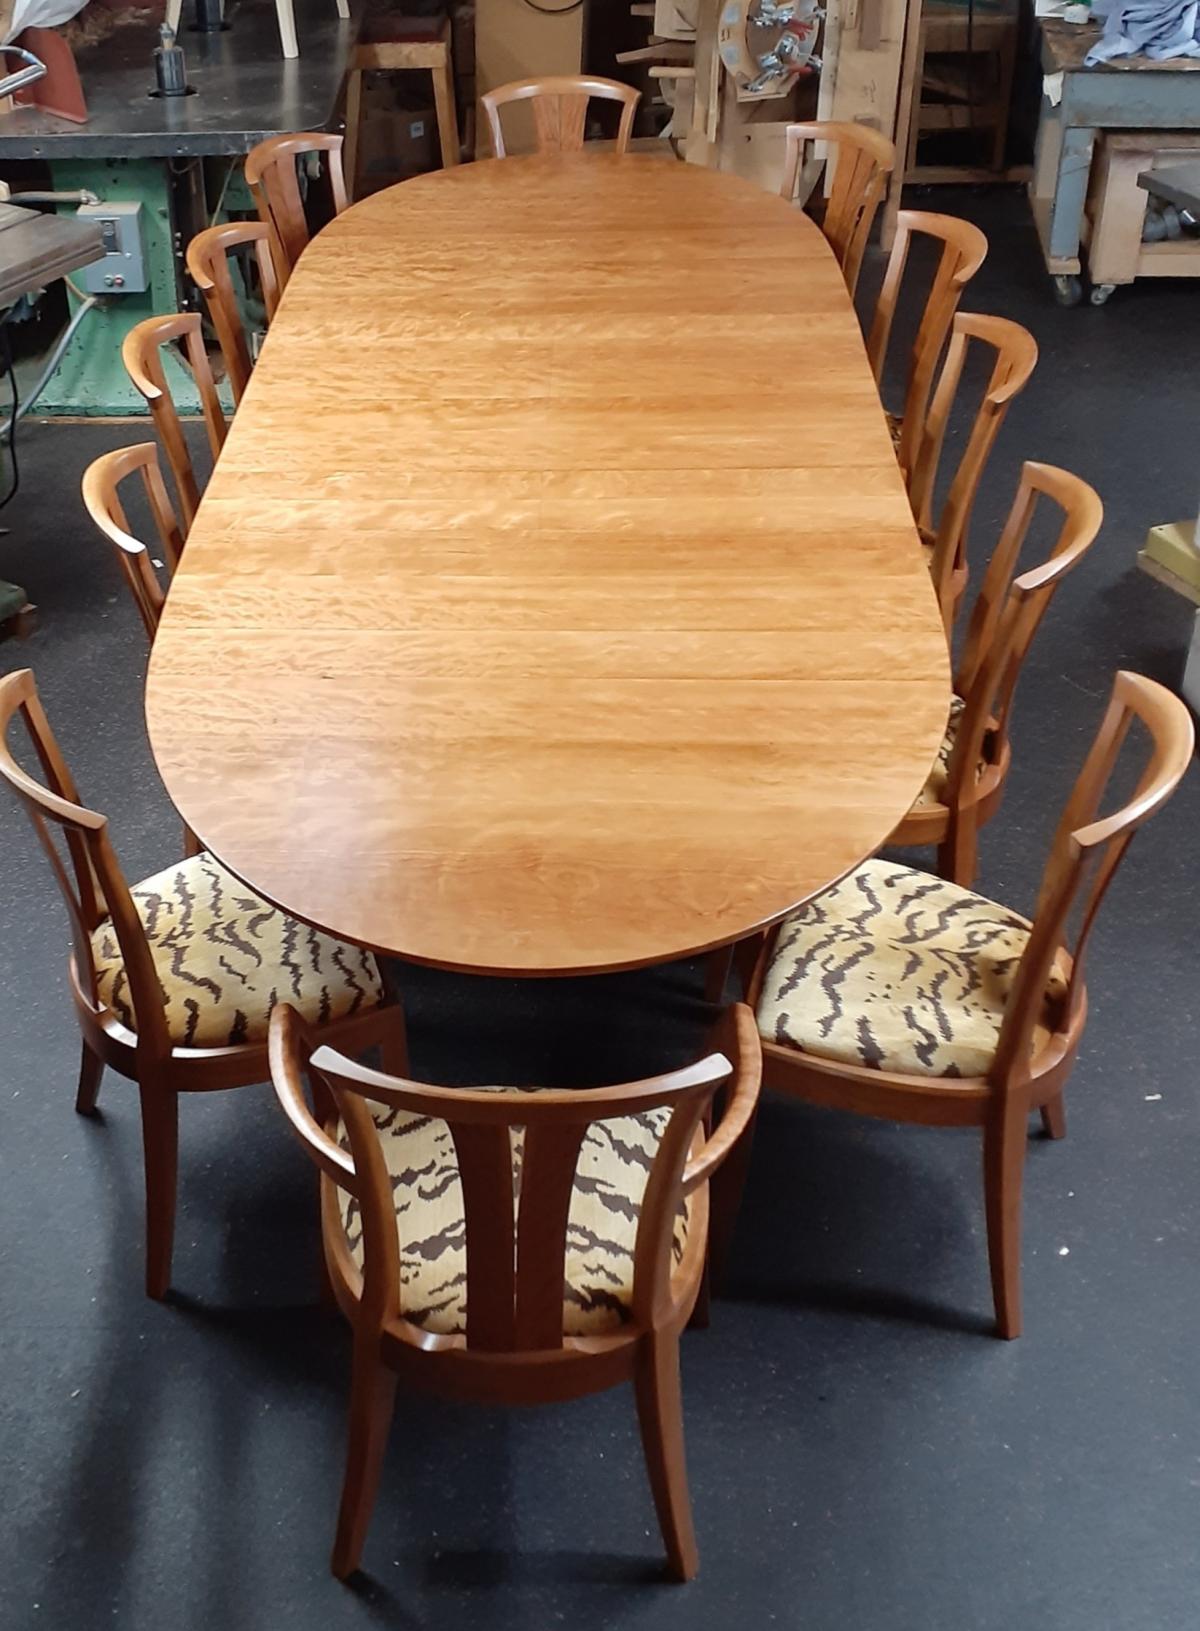 Large Grande table with 3 butterfly leaves added